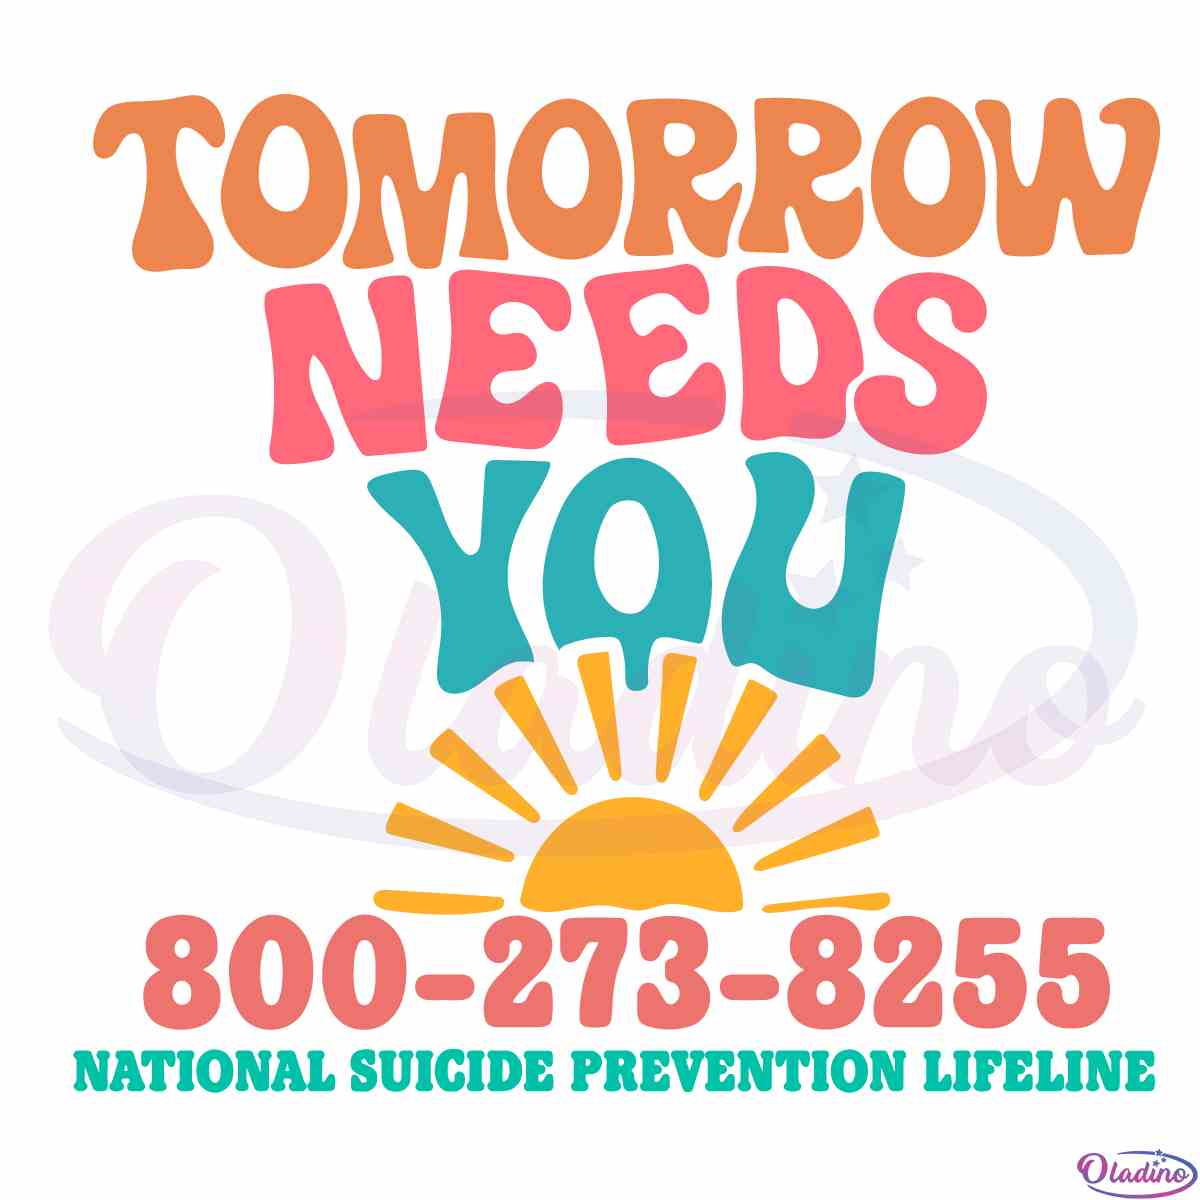 tomorrow-needs-you-sunshine-suicide-prevention-awareness-svg-cutting-files